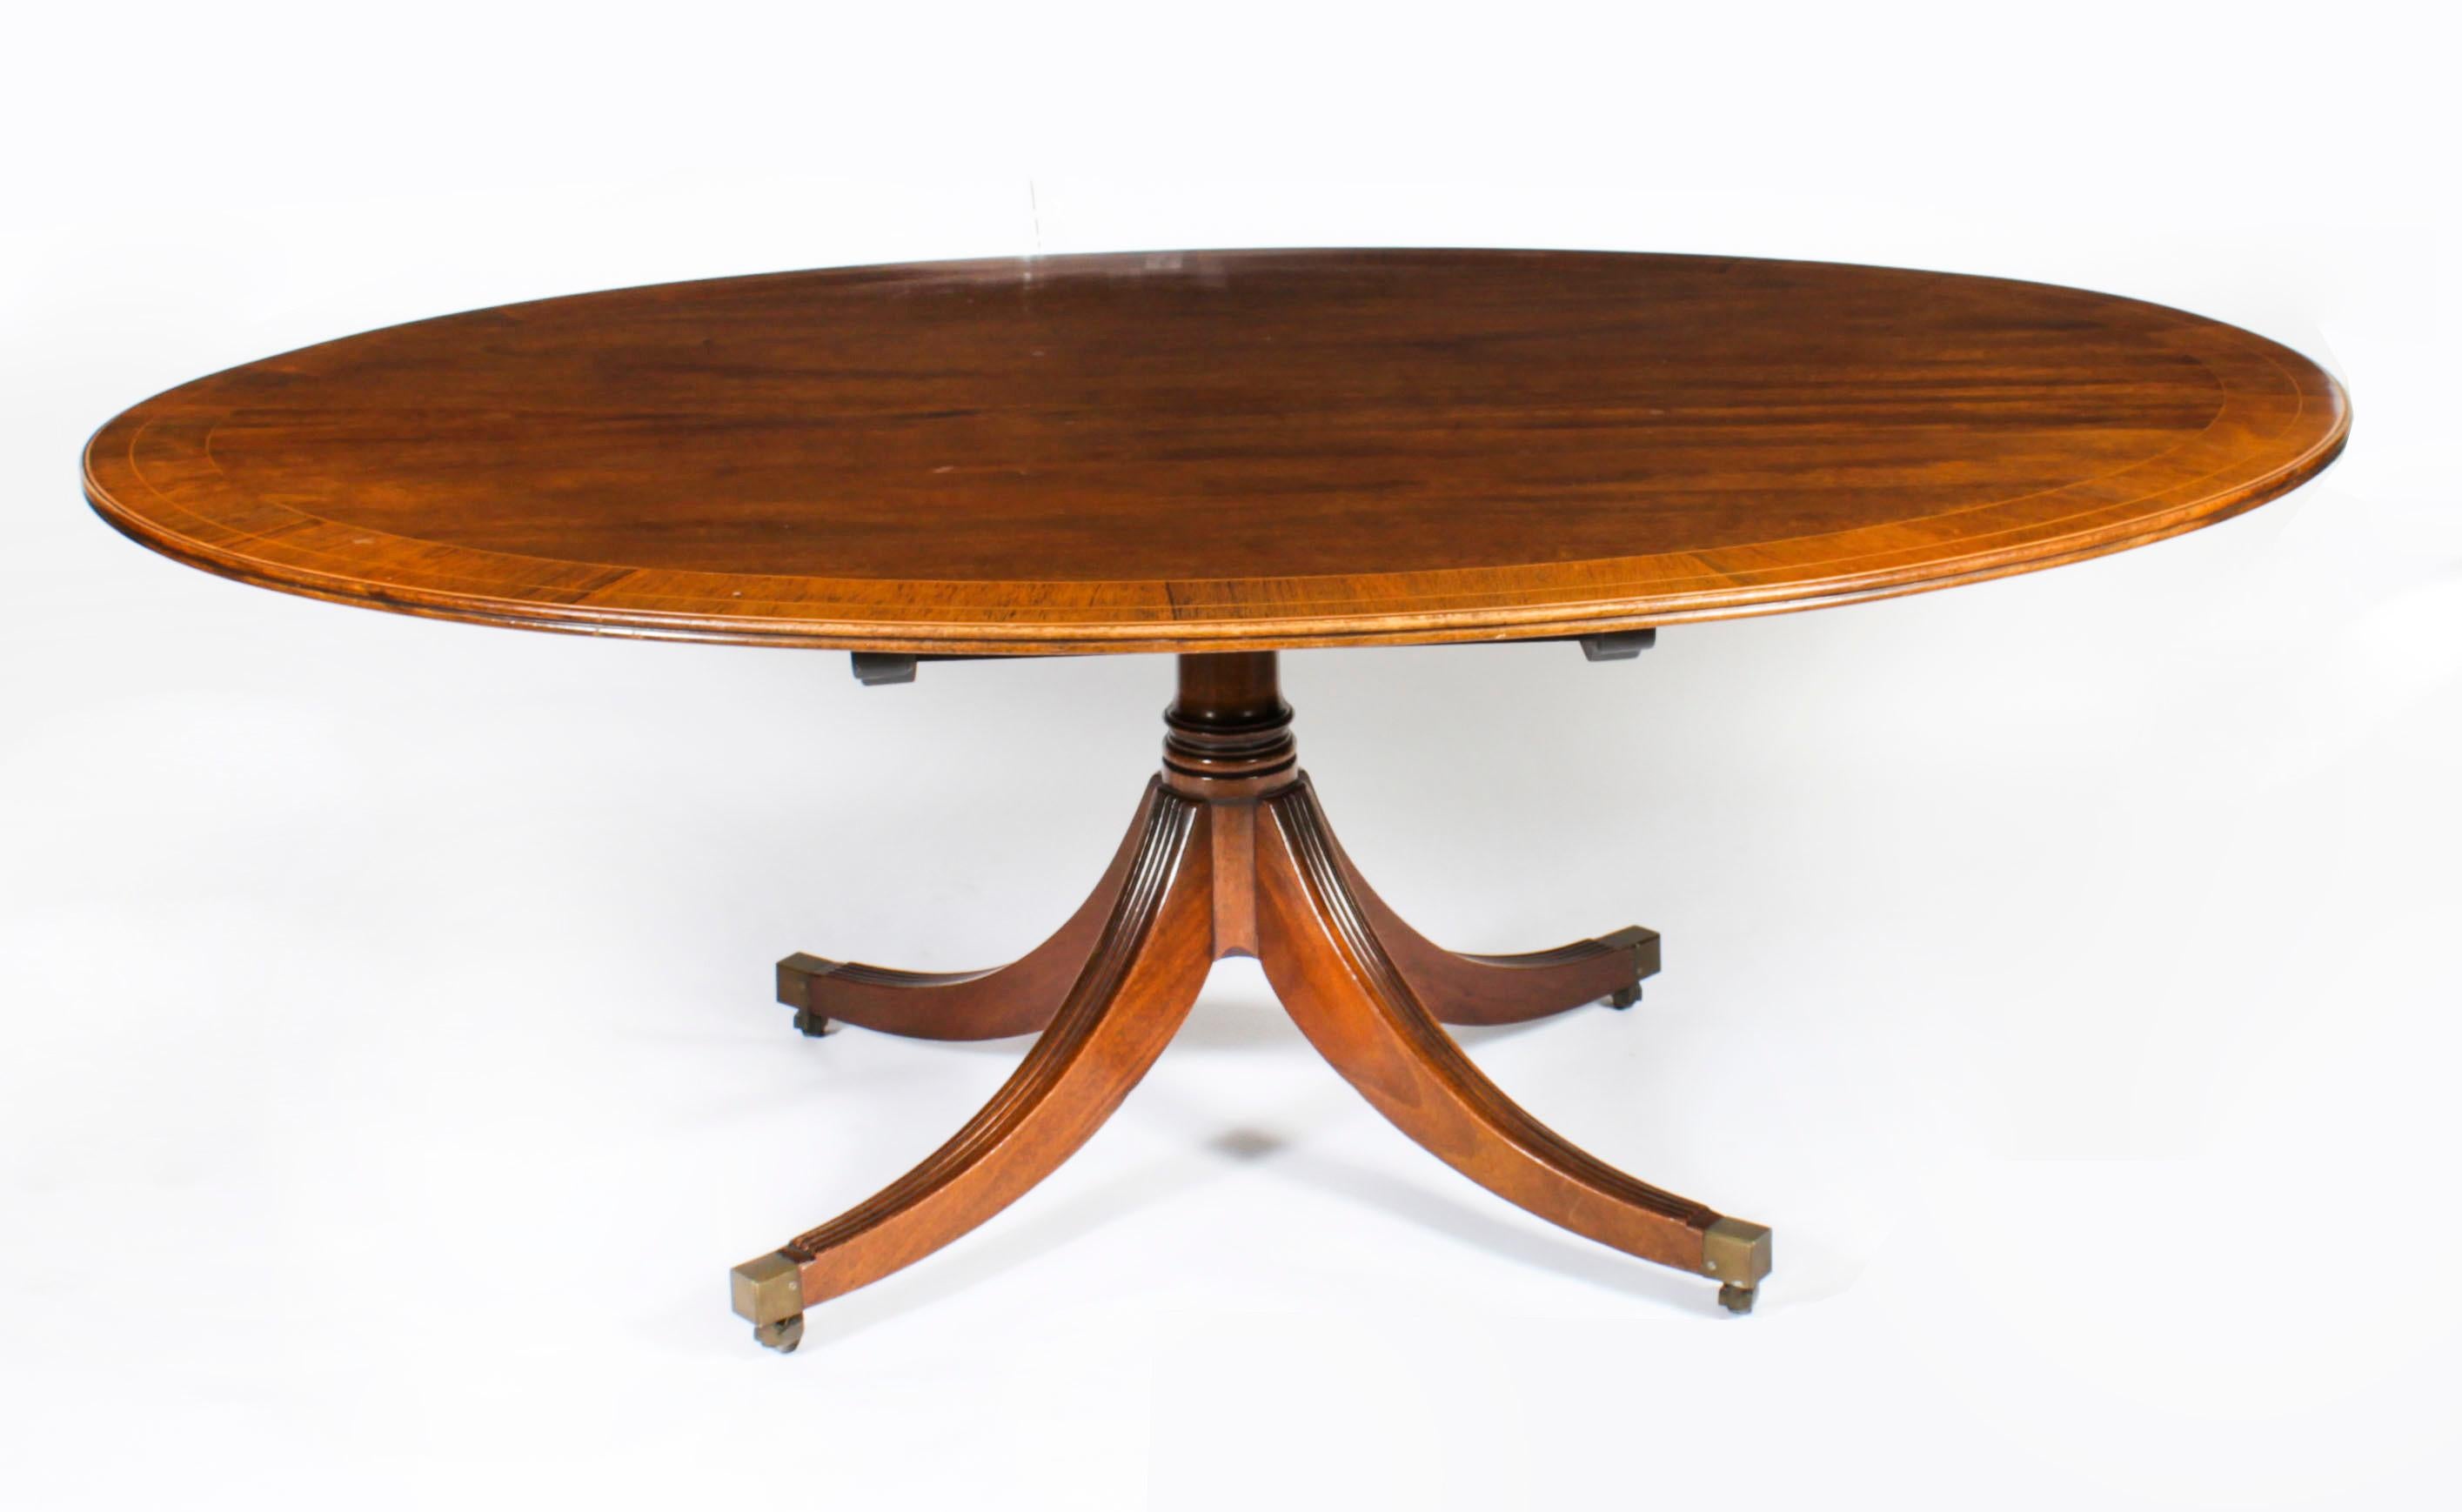 This is a beautiful antique Regency Revival flame mahogany and Gonçalo Alves banded tilt top oval dining table dating from Circa 1920. 
 
The fabulous 6ft 6inch flame mahogany tilt top table can seat eight people in comfort. The top is